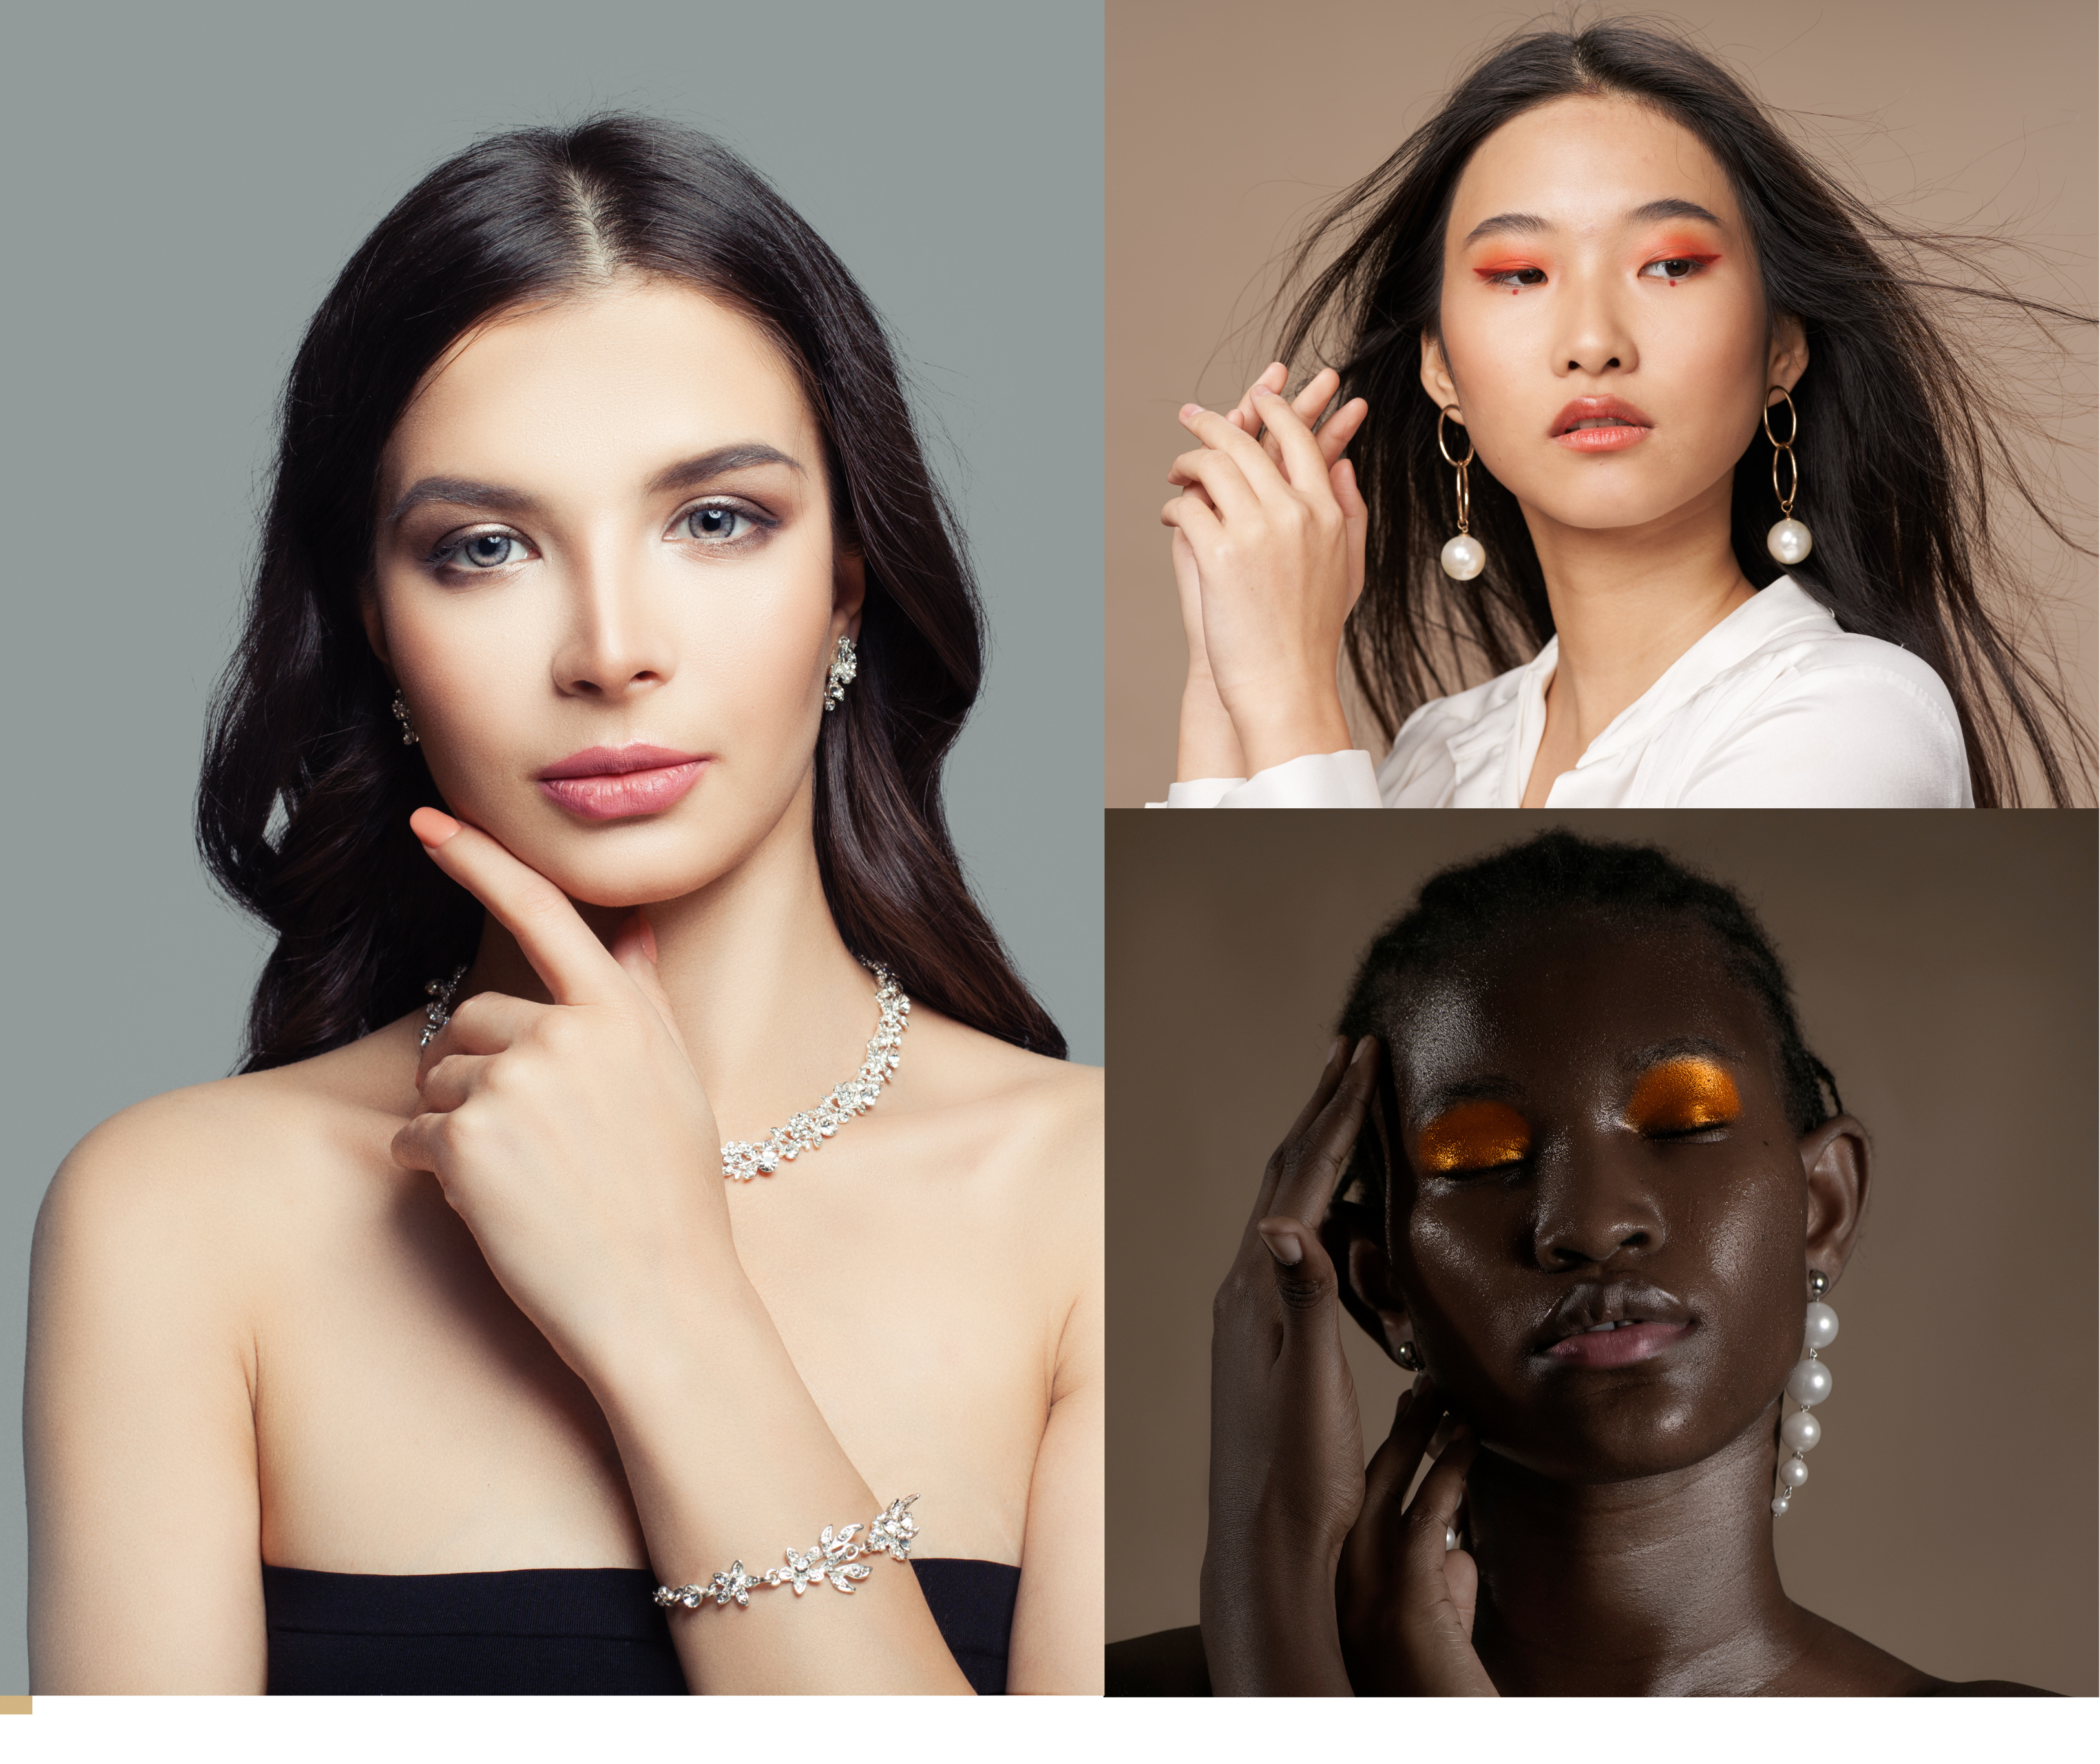 Part Of Female Face With Beautiful Golden Jewelry On Body And Bright  Make-up - Posing At Studio Stock Photo, Picture and Royalty Free Image.  Image 63377140.